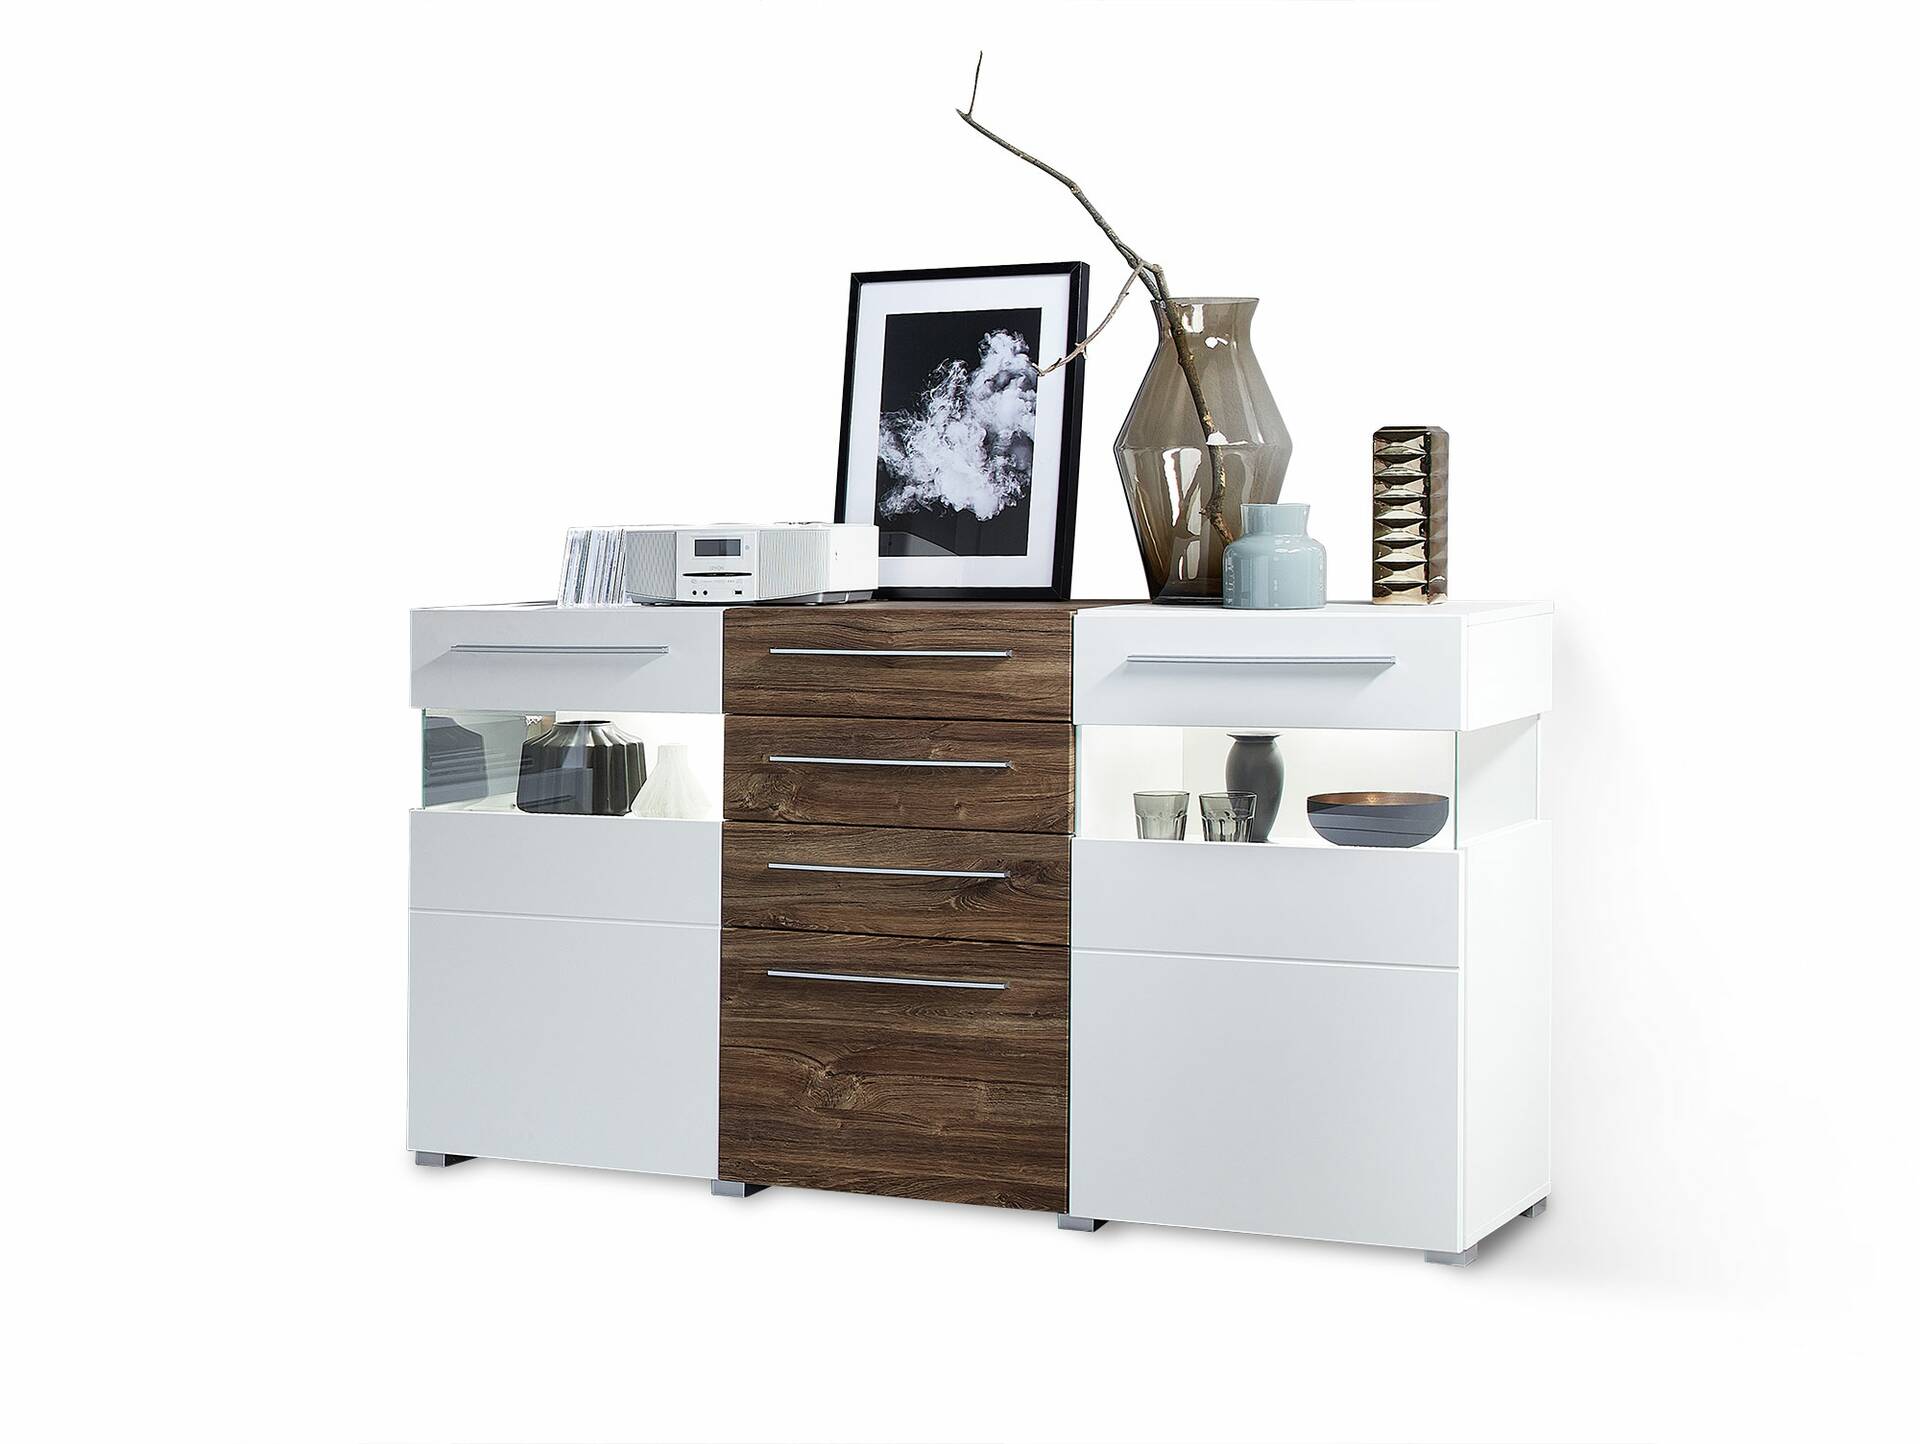 BALIA Sideboard inklusive LED-Beleuchtung, Material MDF 